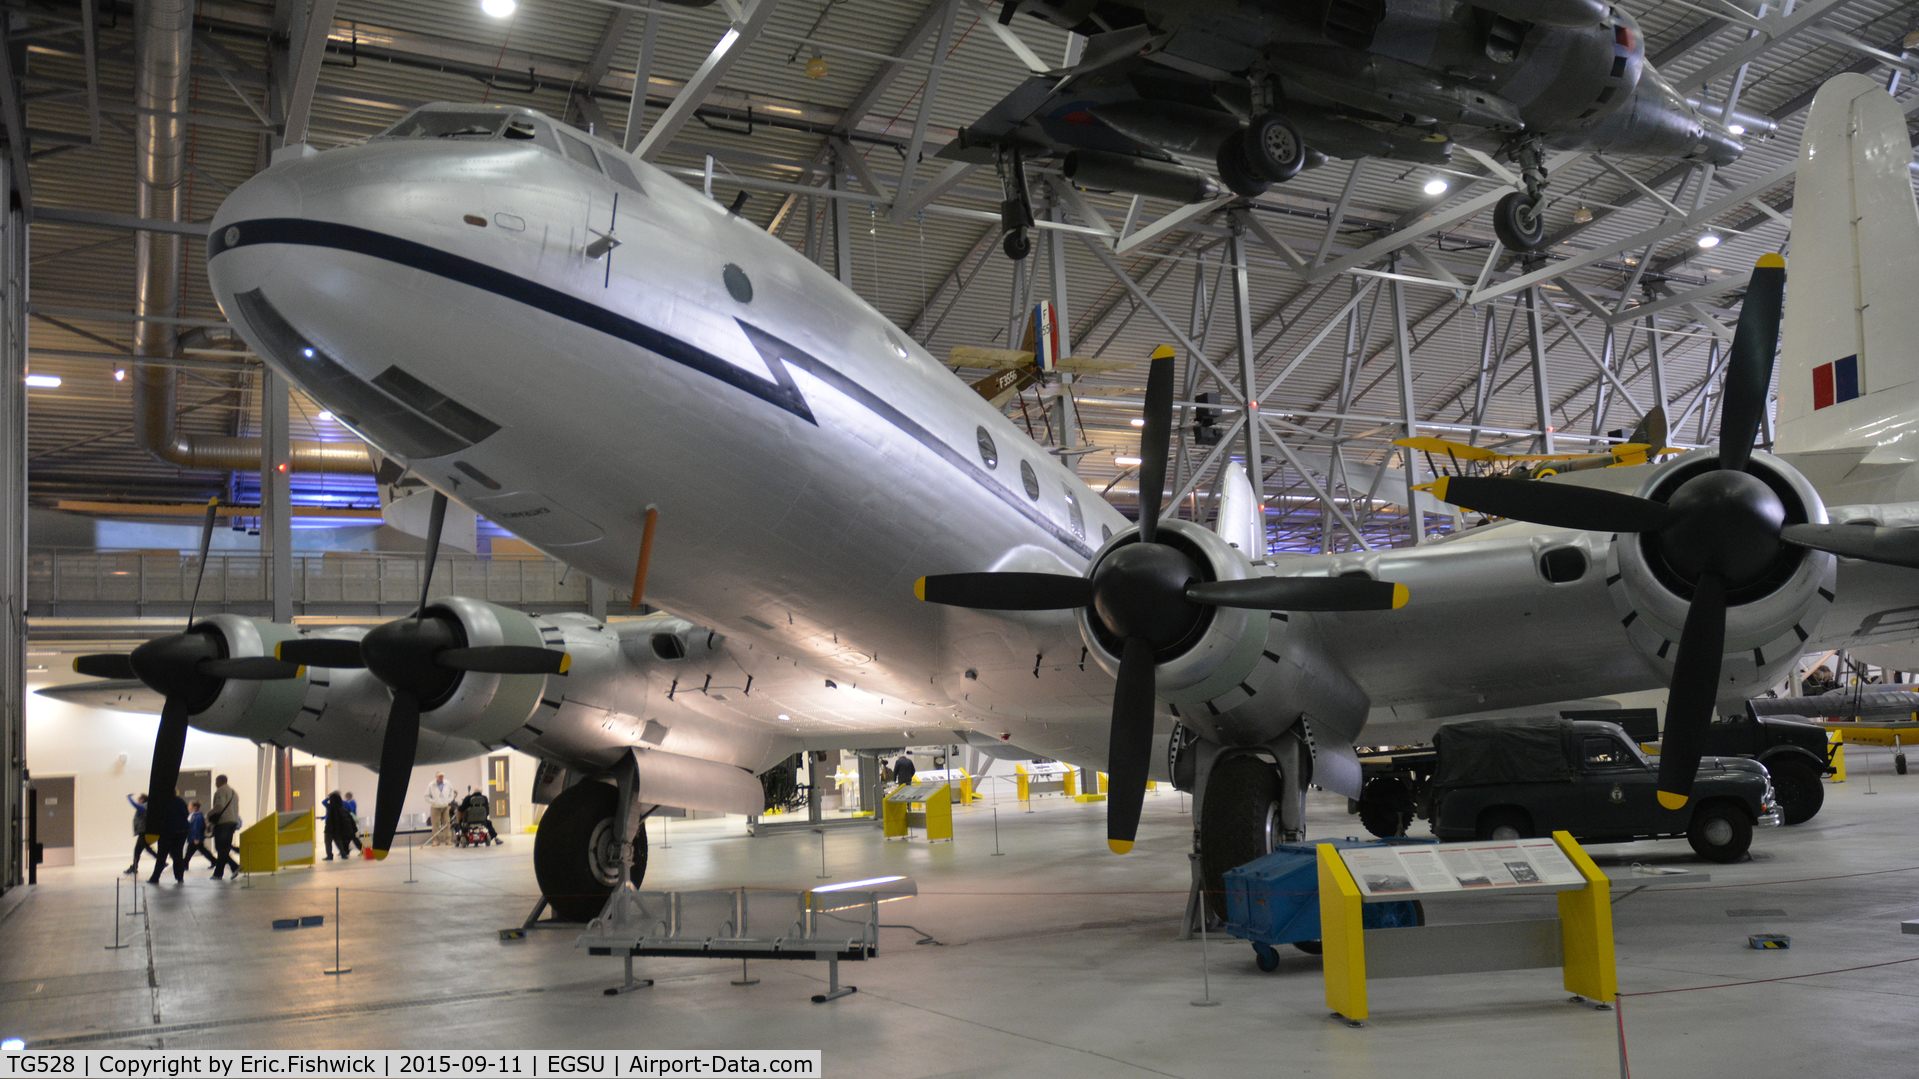 TG528, 1948 Handley Page Hastings C.1A C/N HP67/32, 3. TG528 in the Airspace Hanger at The Imperial War Museum, Duxford, Cambridgeshire.